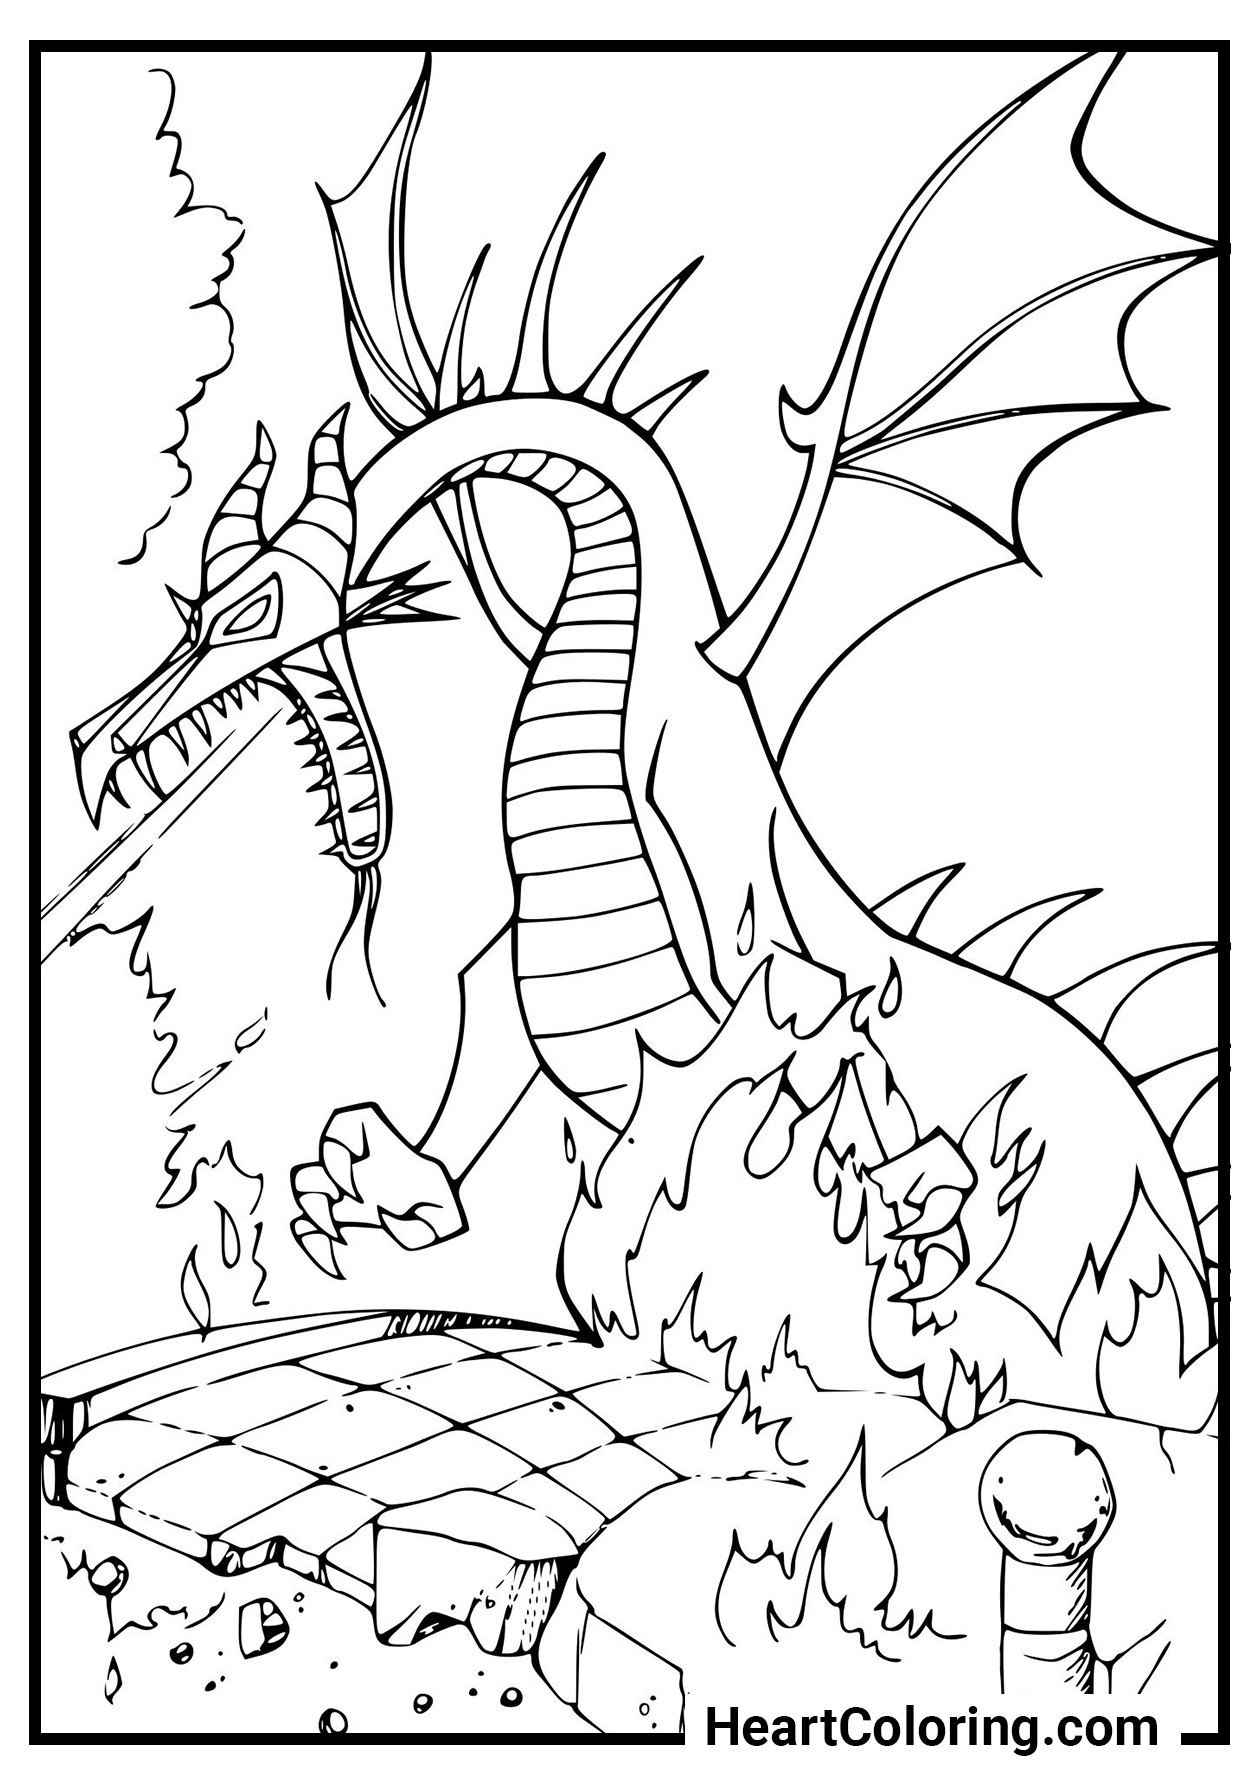 Dragon Coloring Pages for Adults Unique 199